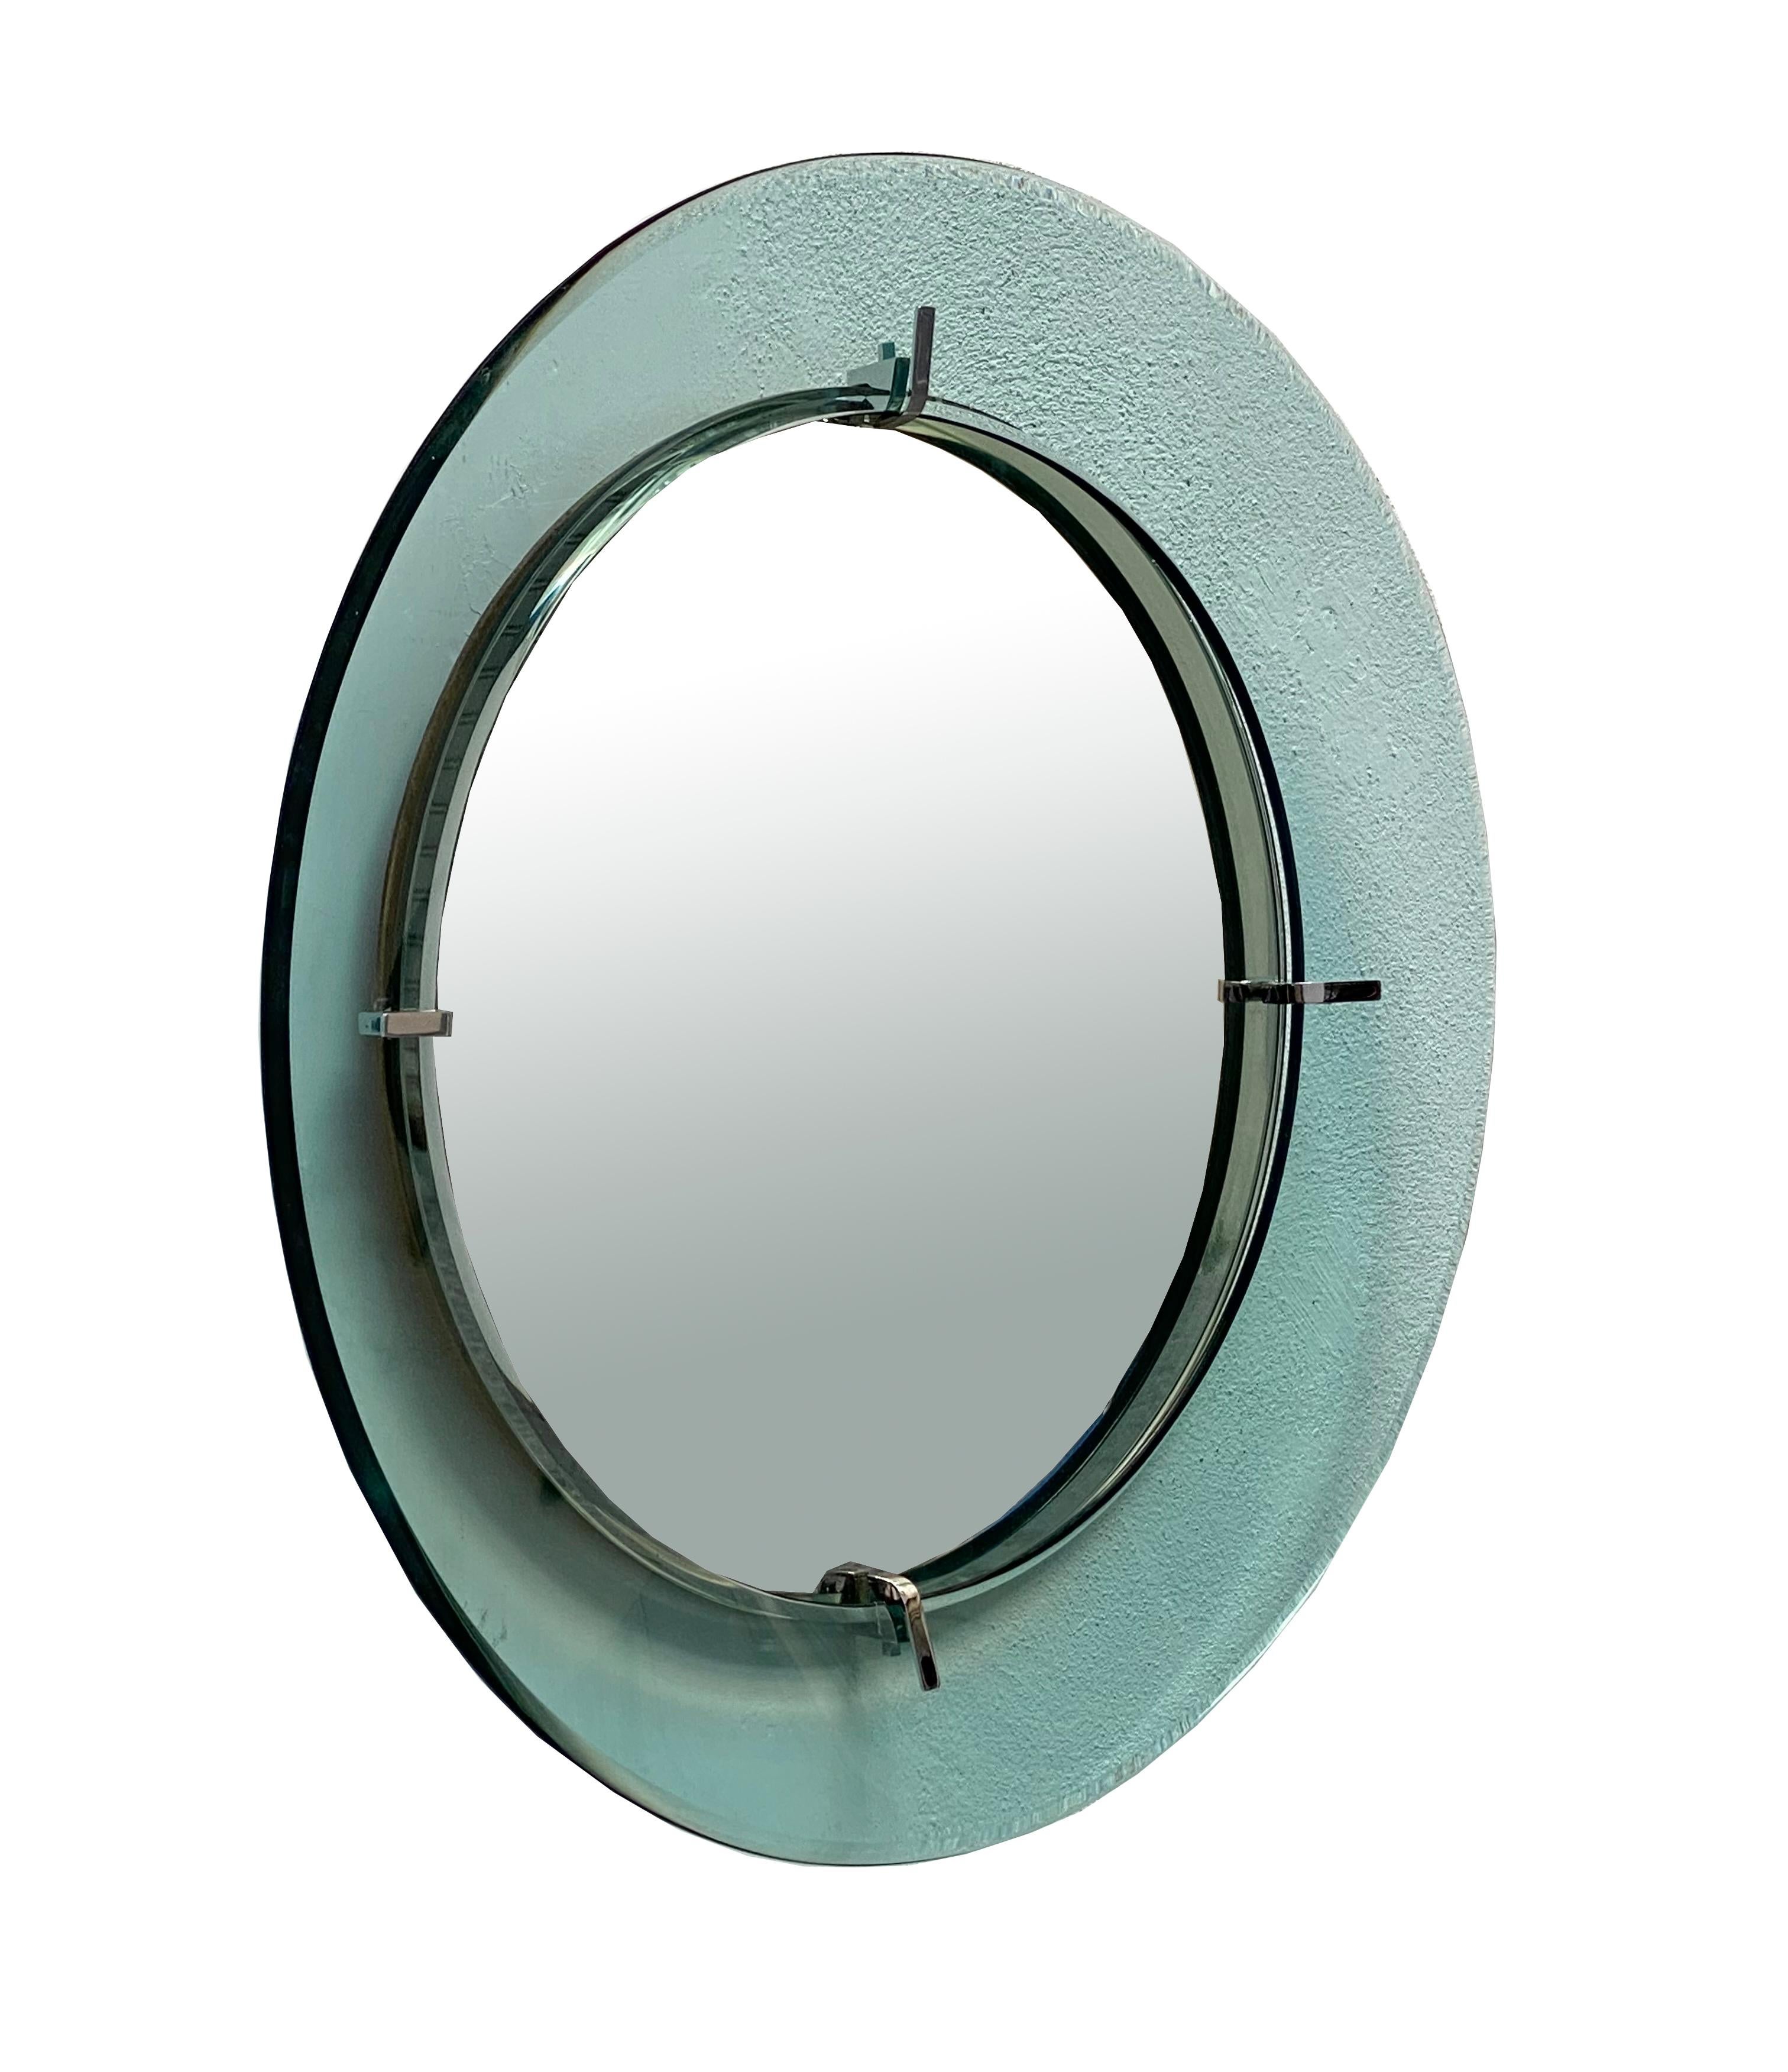 This round wall mirror was made in Italy around the 1960s. It consists of a wood and metal structure with a transparent green frame joined by 4 chromed metal supports. Remains in excellent condition. Few oxidation spots on the mirror near the edge.